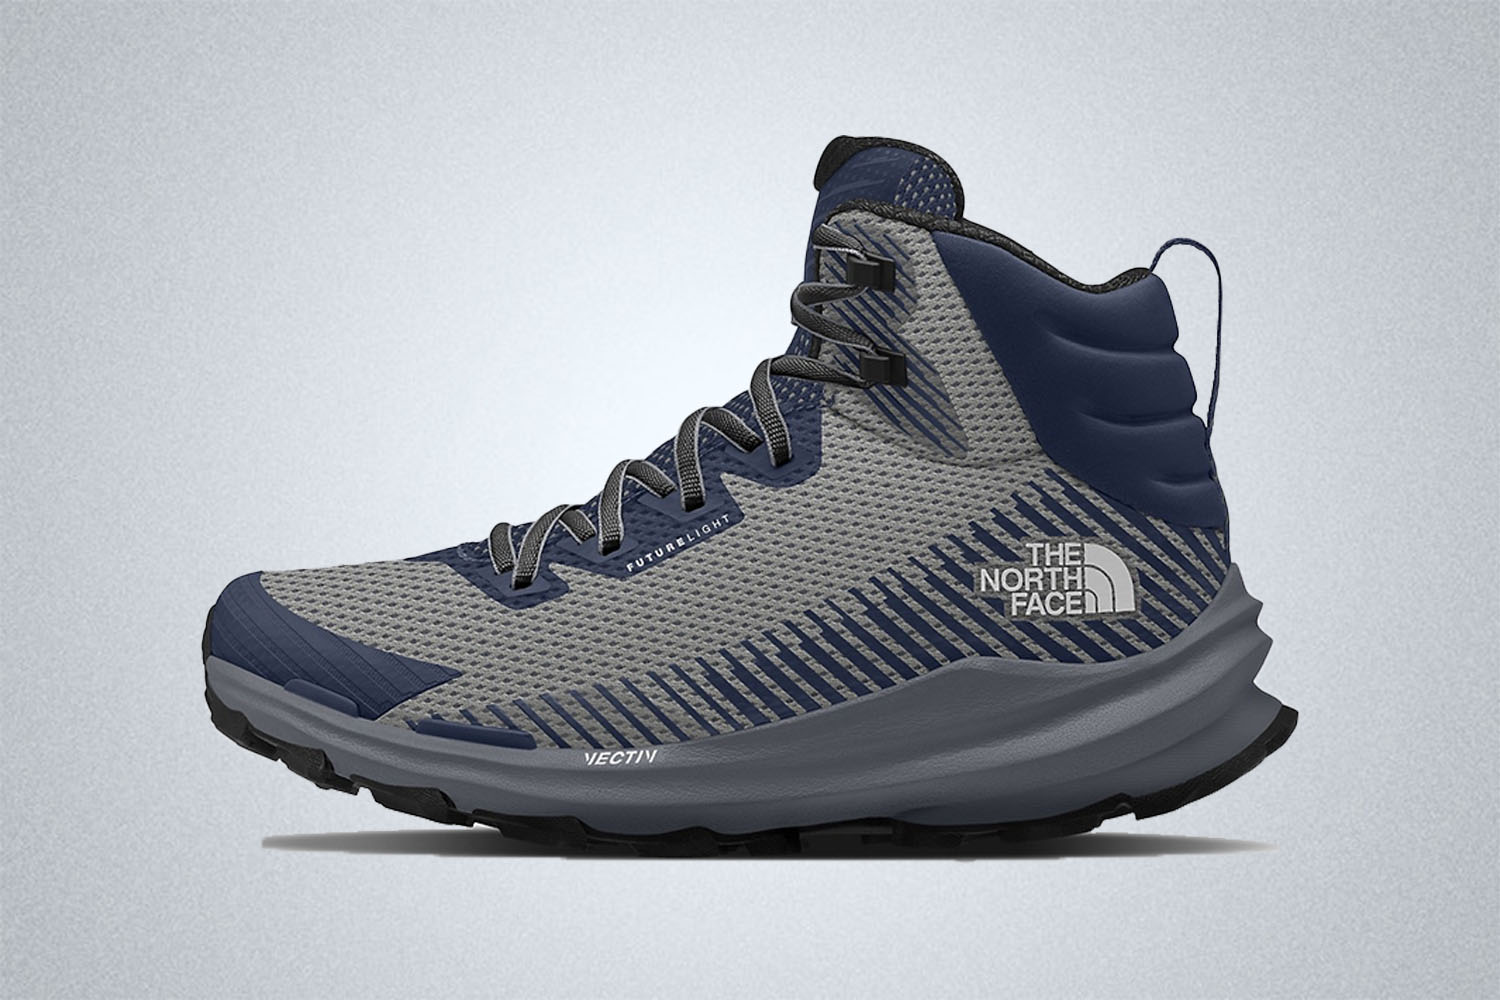 The North Face VECTIV Fastpack Mid Futurelight Boots